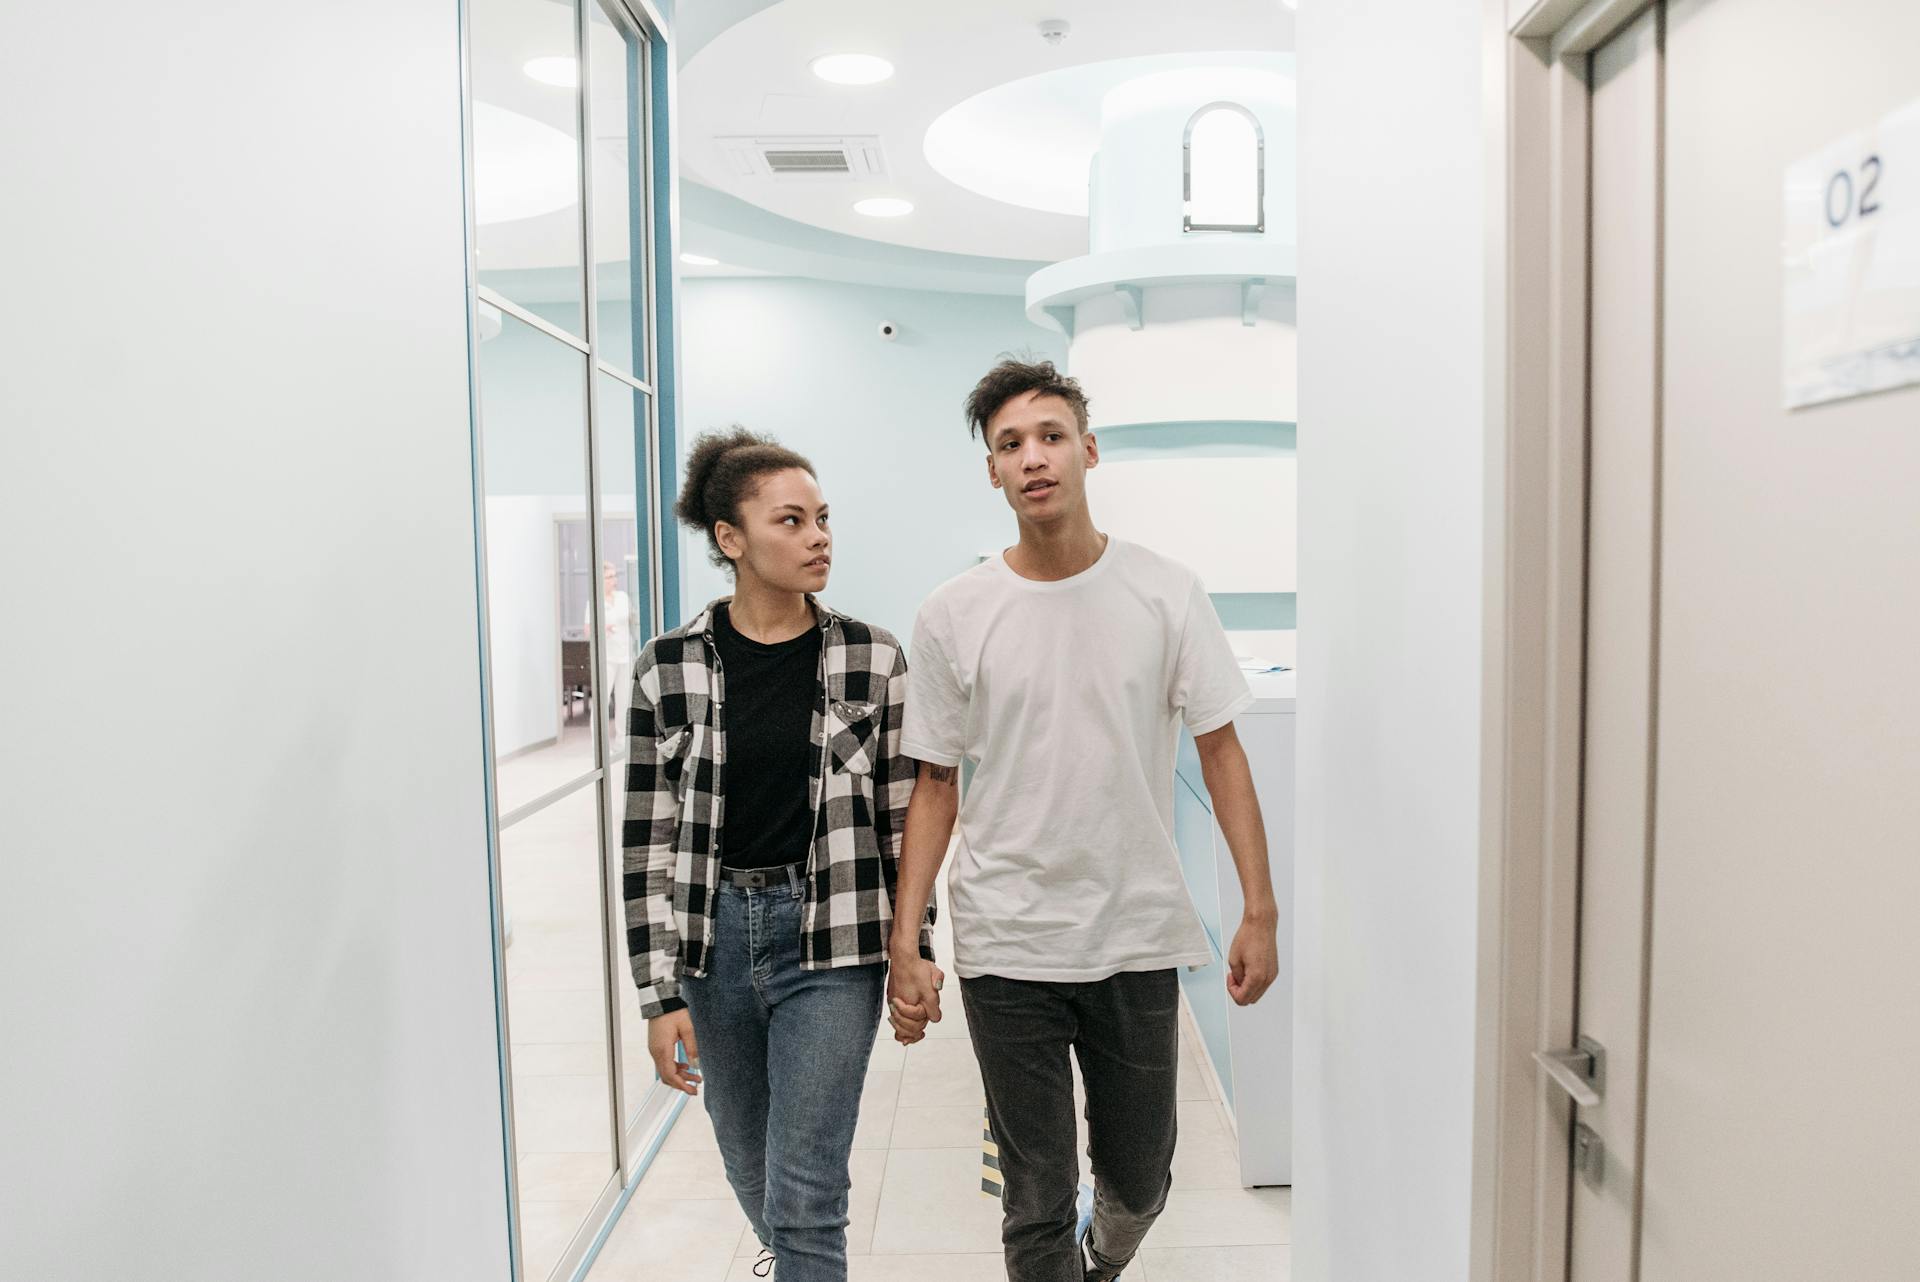 Couple arriving the hospital | Source: Pexels